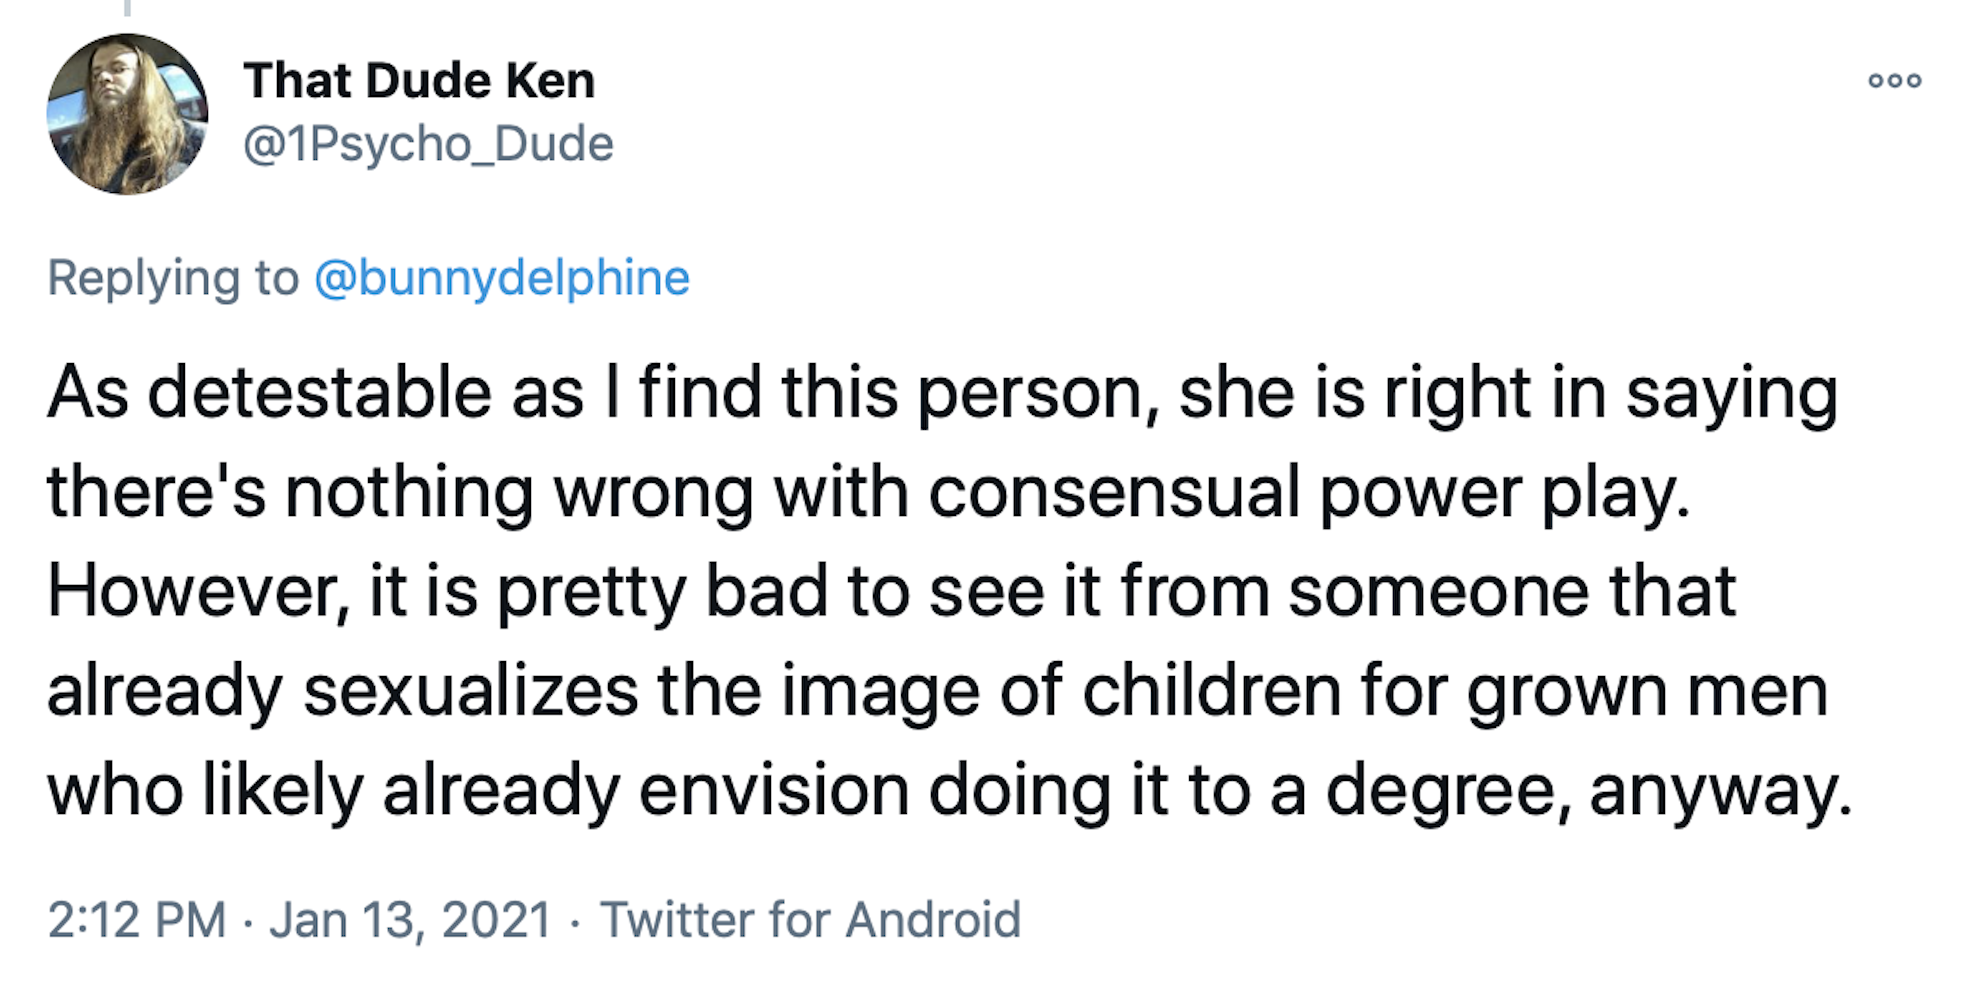 As detestable as I find this person, she is right in saying there's nothing wrong with consensual power play. However, it is pretty bad to see it from someone that already sexualizes the image of children for grown men who likely already envision doing it to a degree, anyway.